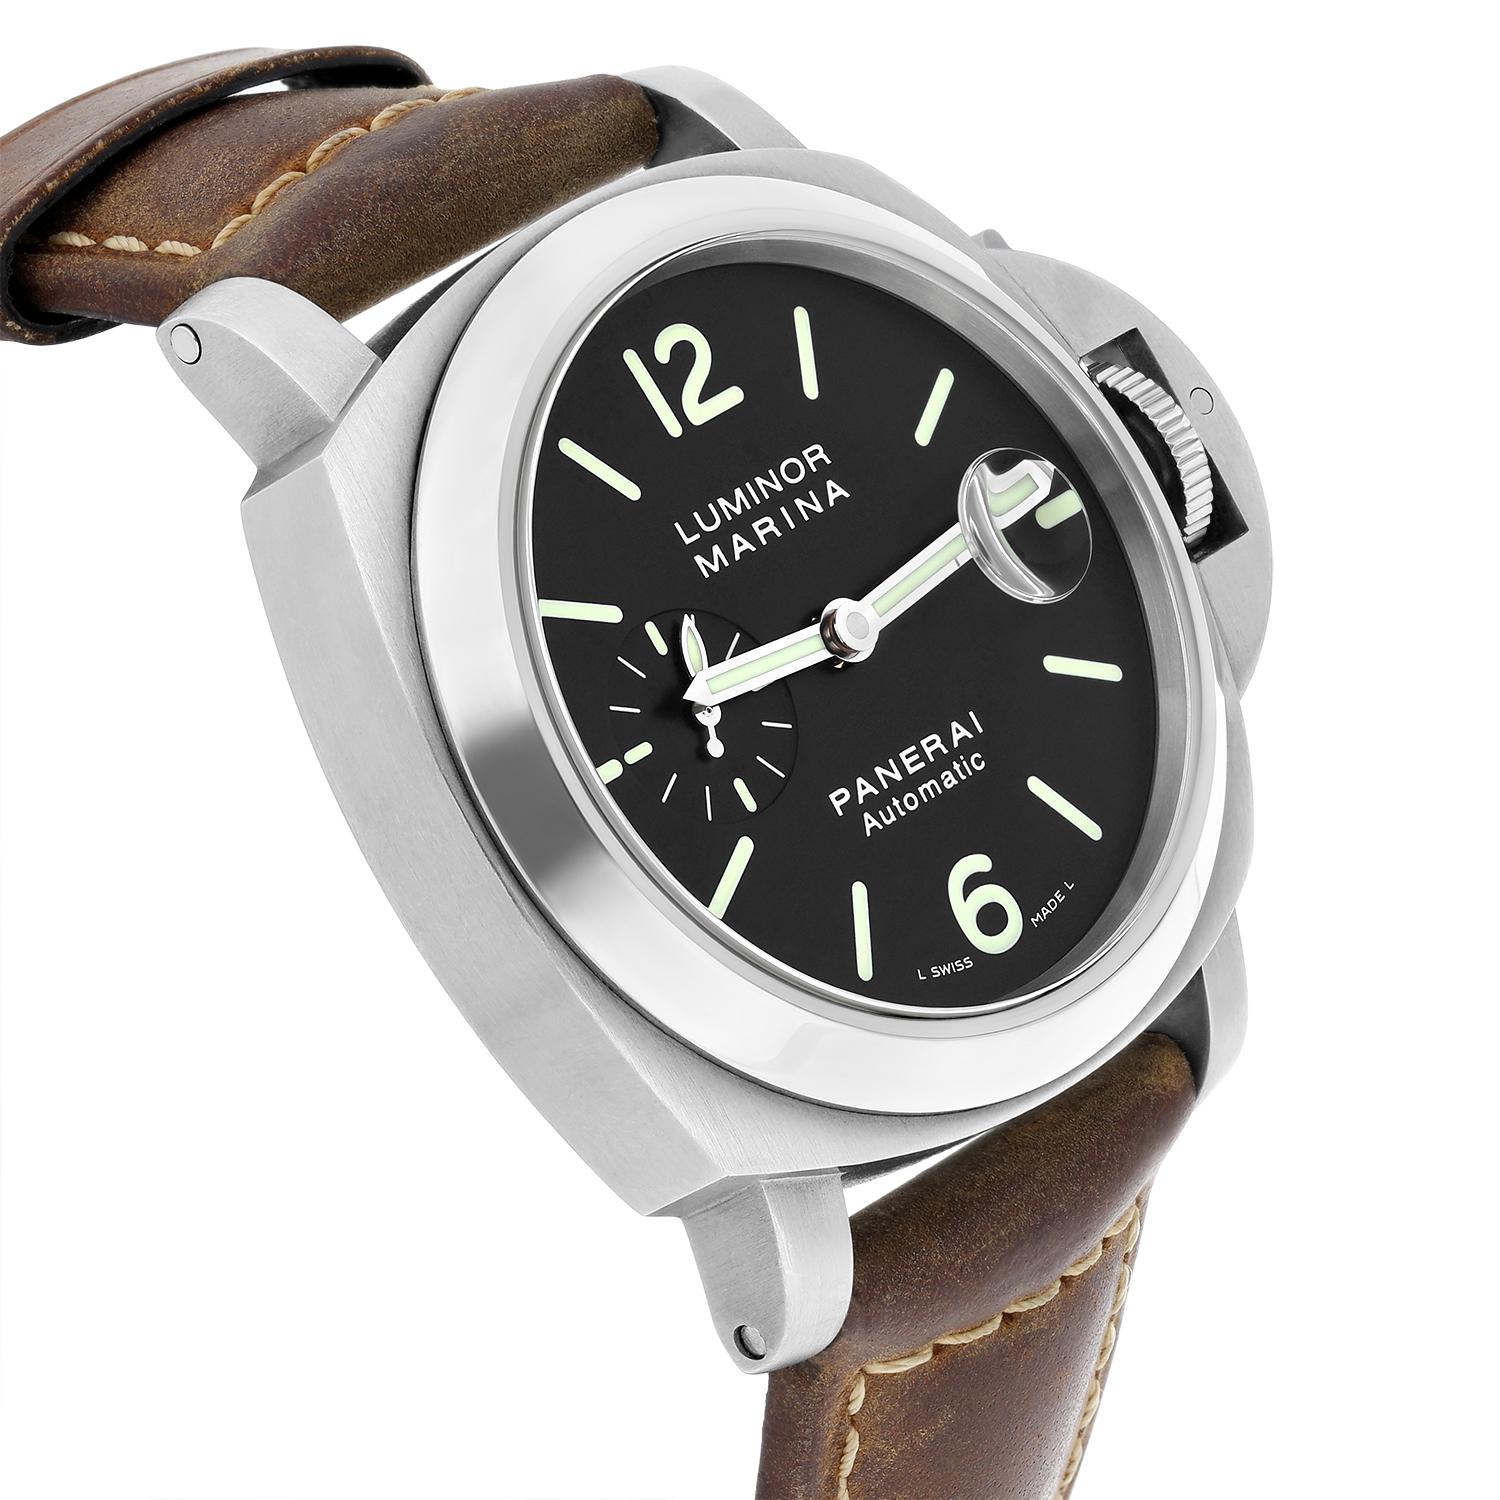 Panerai Luminor Marina PAM00104 Small Second Date Automatic Men's Watch In Excellent Condition For Sale In New York, NY